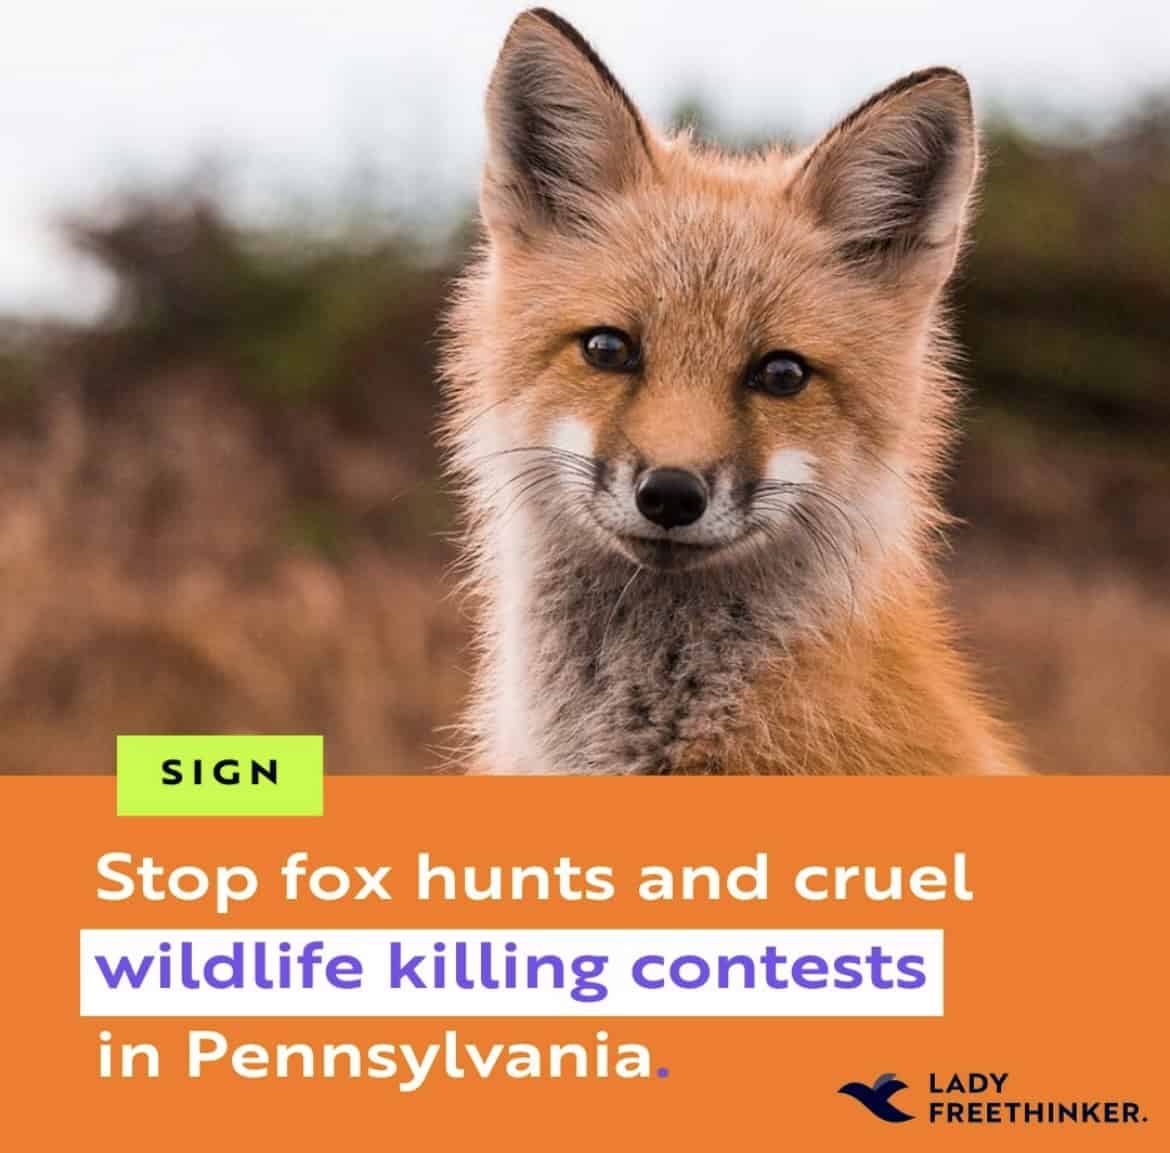 Foxes in Pennsylvania need HELP!